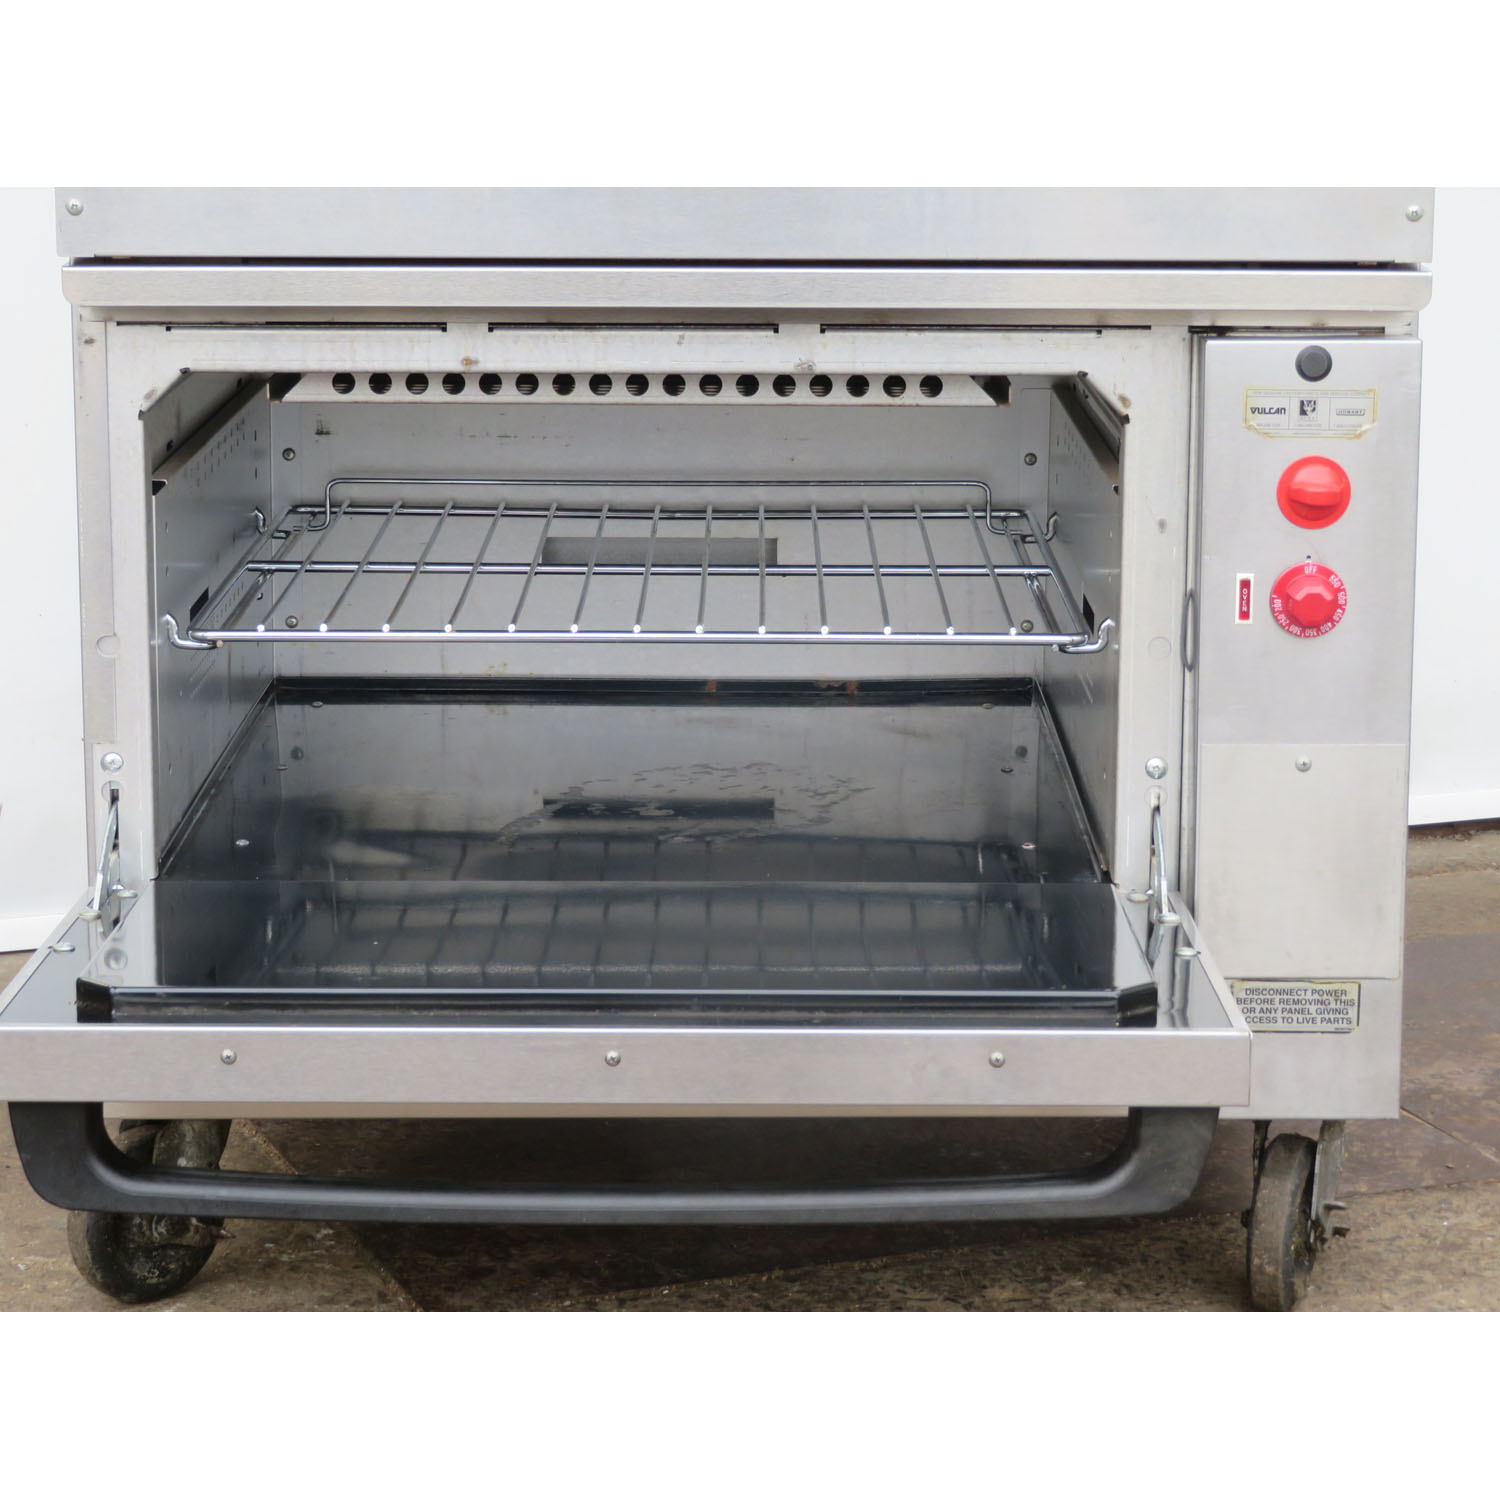 Vulcan EV36S Electric Range Oven, Used Excellent Condition image 2